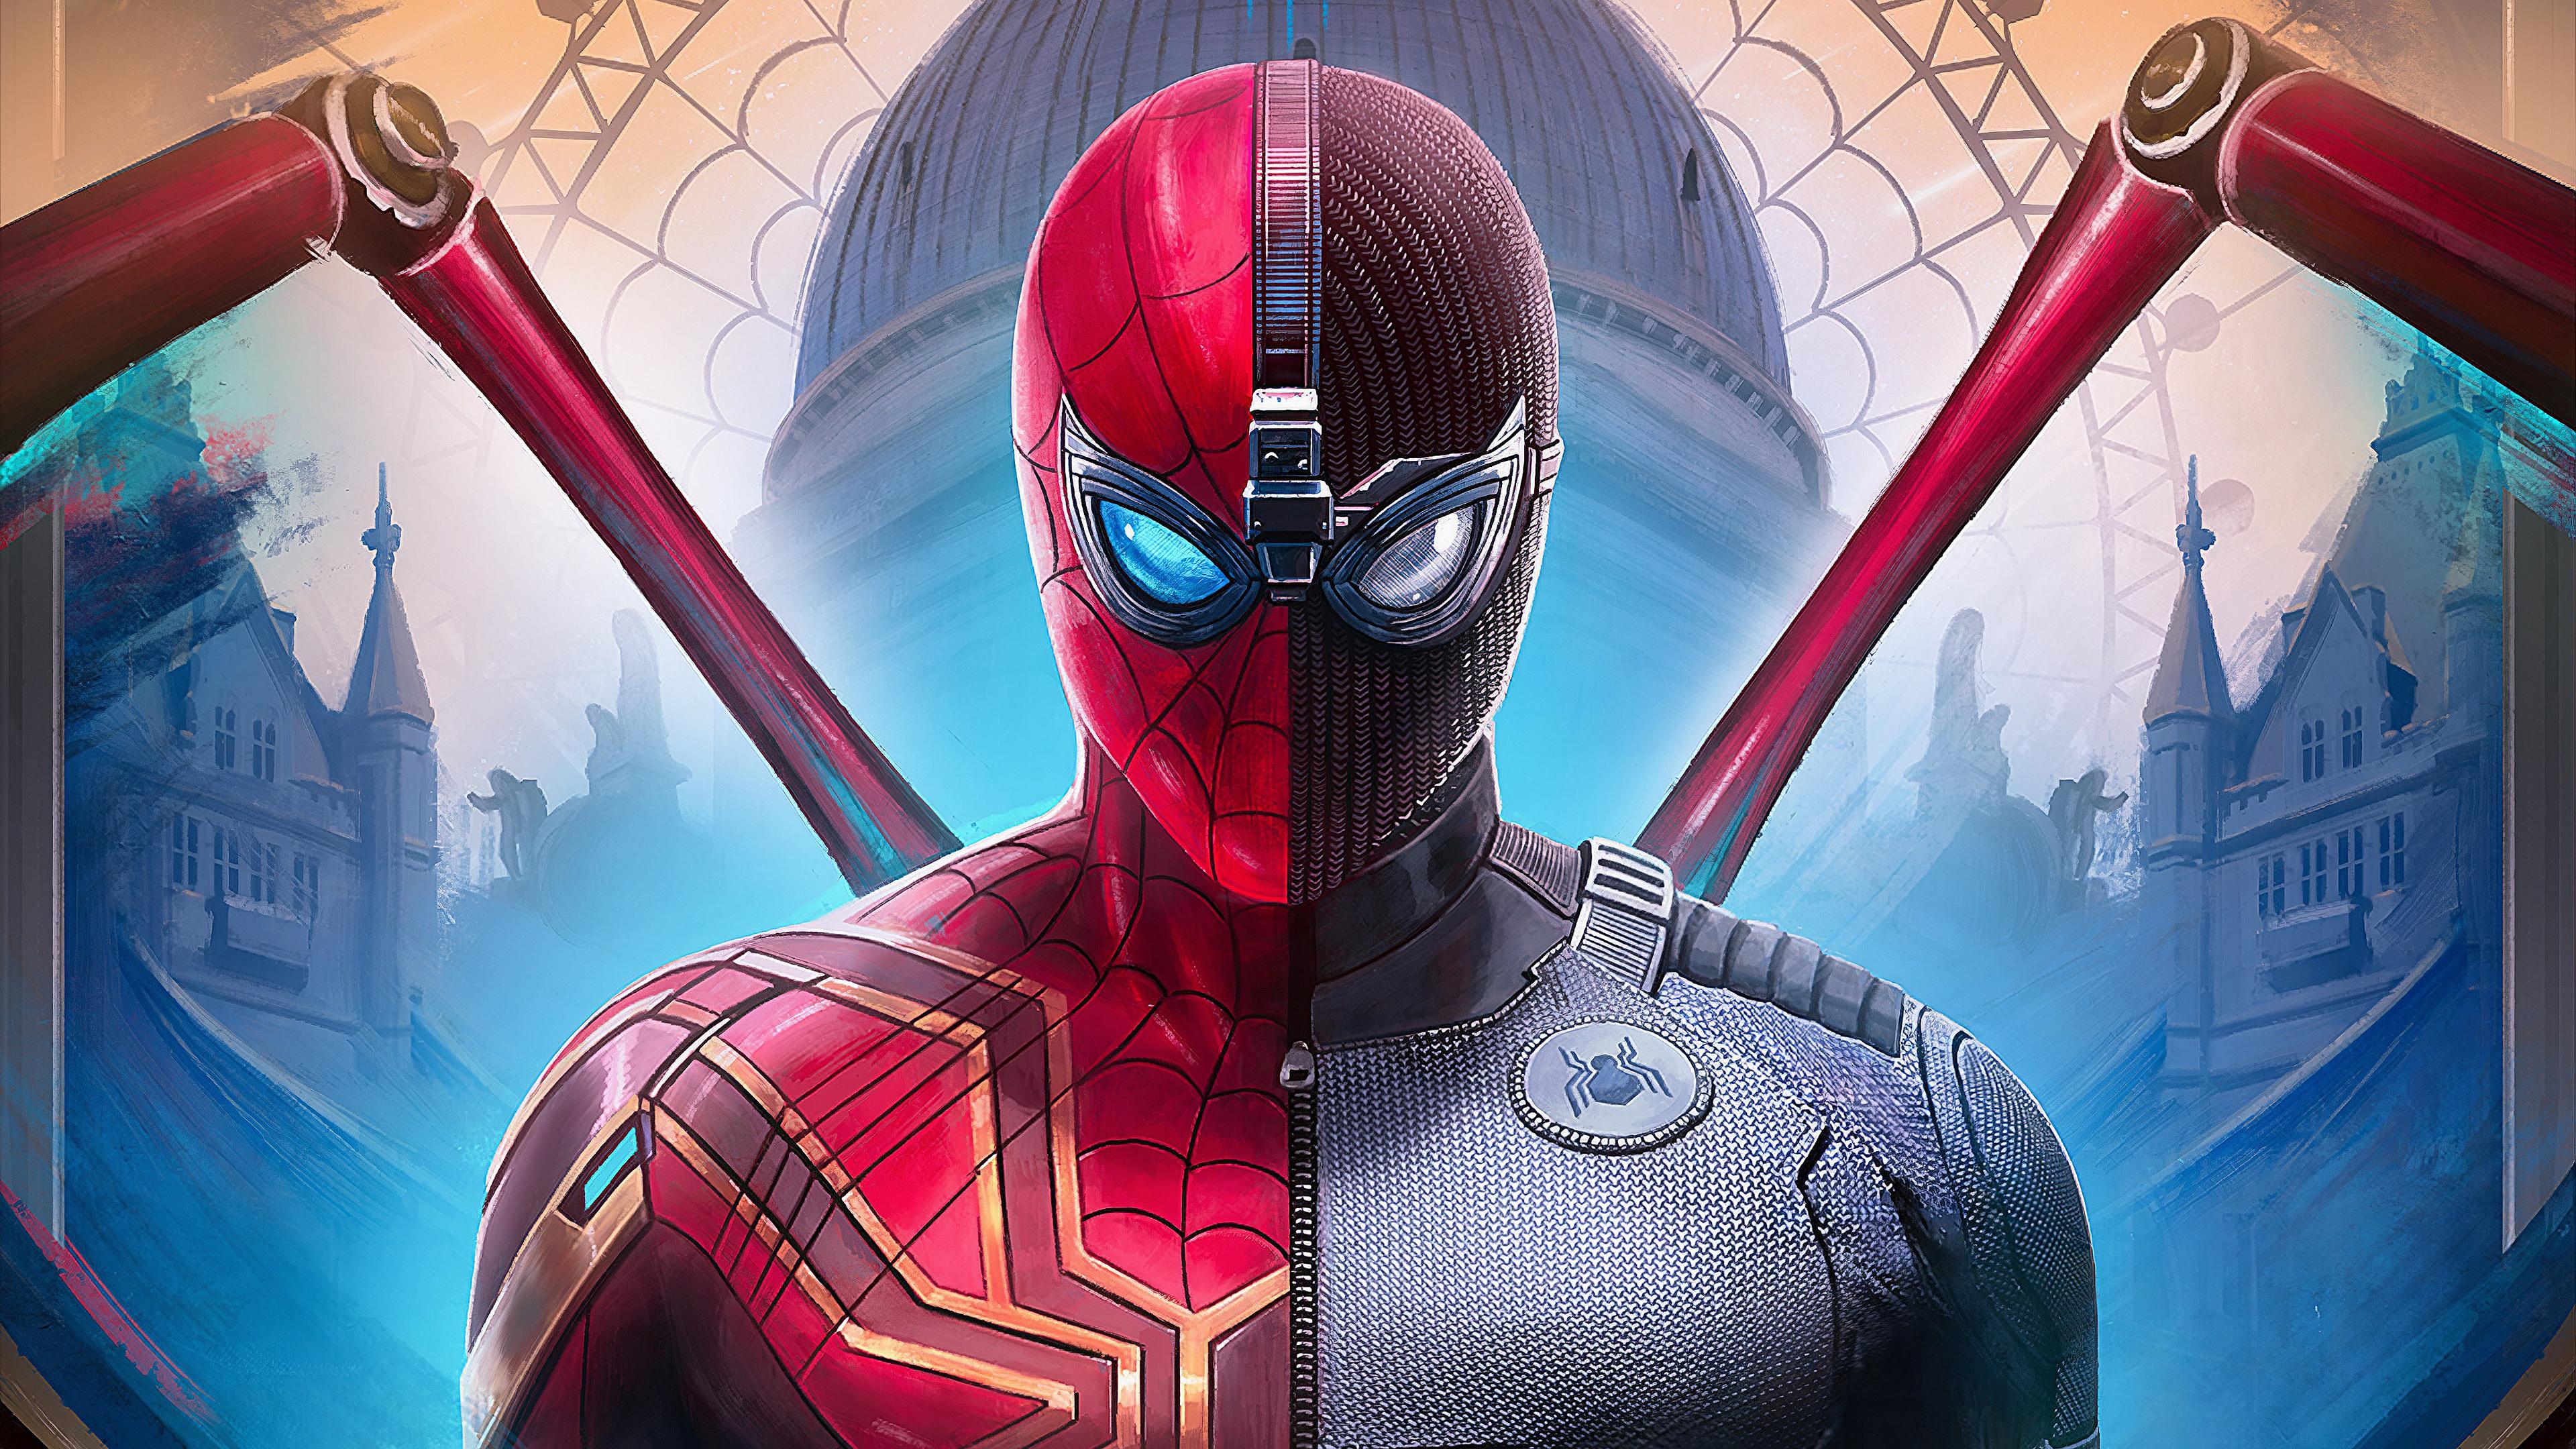 3840 x 2160 · jpeg - Spiderman Far From Home Suit, HD Superheroes, 4k Wallpapers, Images ...